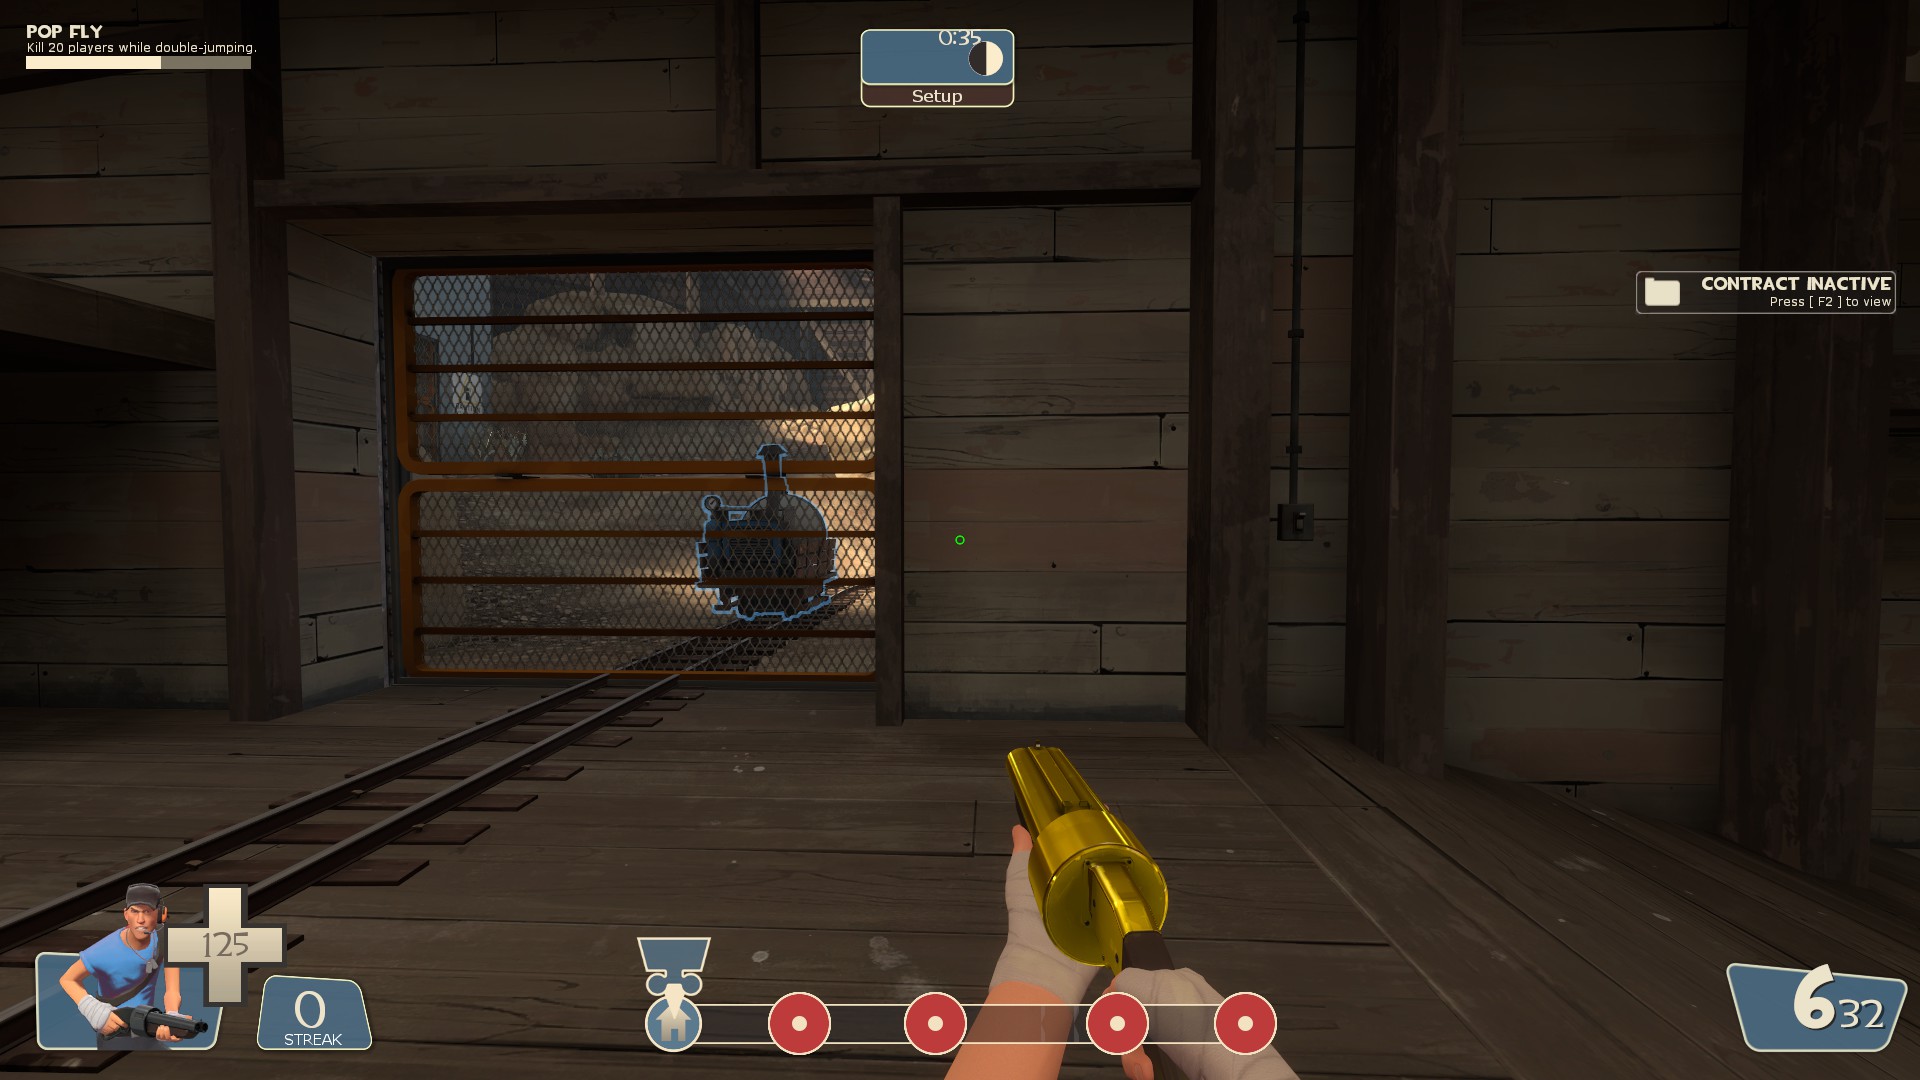 Team Fortress 2: How to Track Achievement Progress on Your HUD